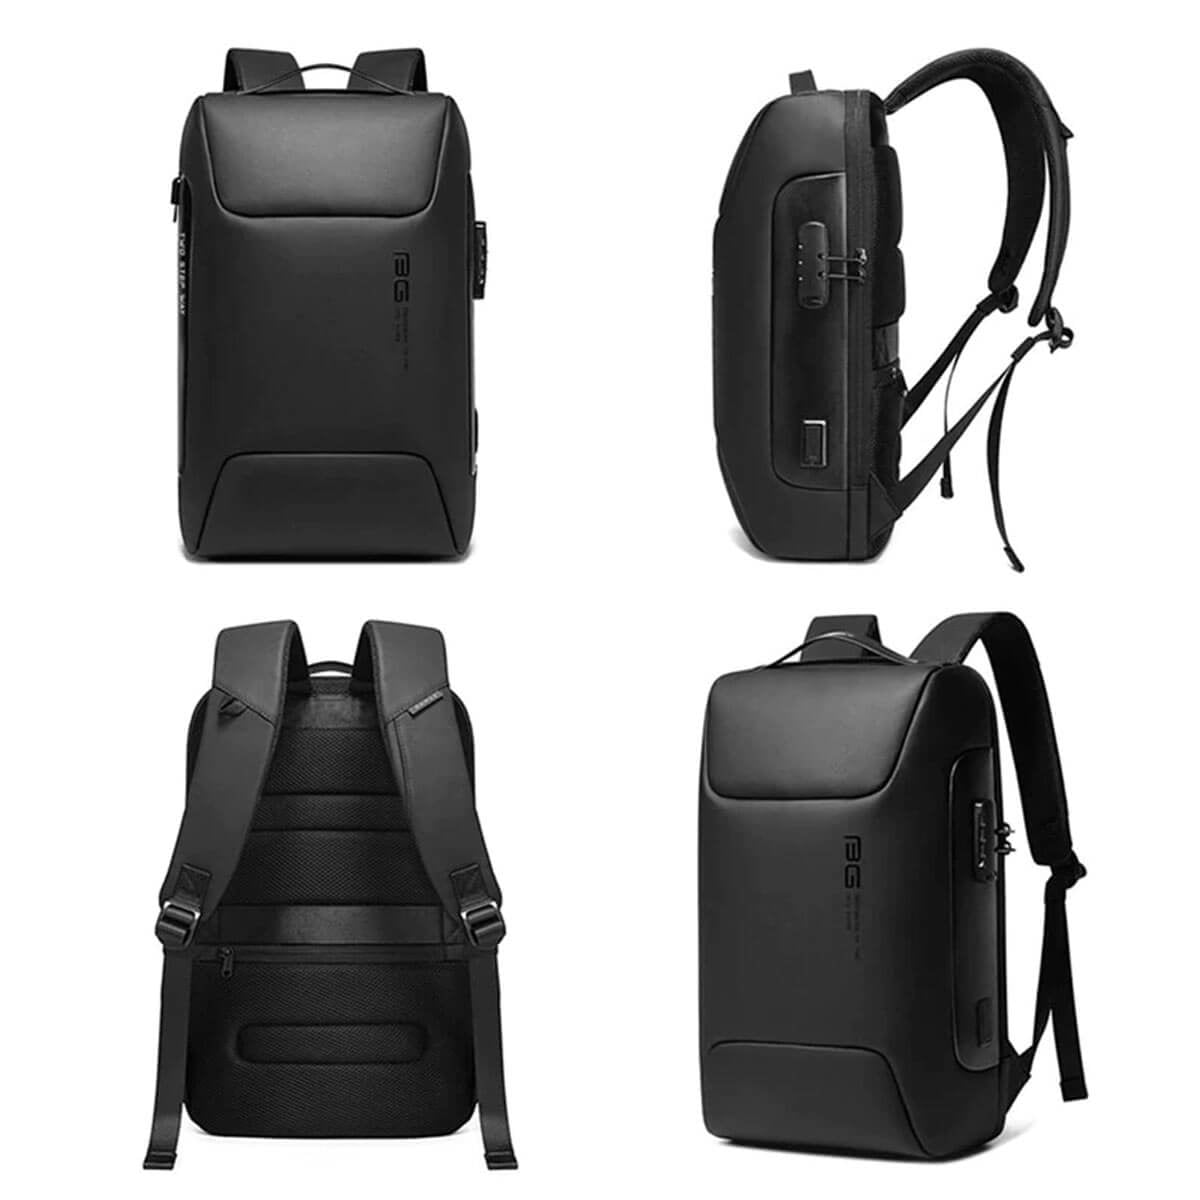 Waterproof business backpack with lock and USB charging